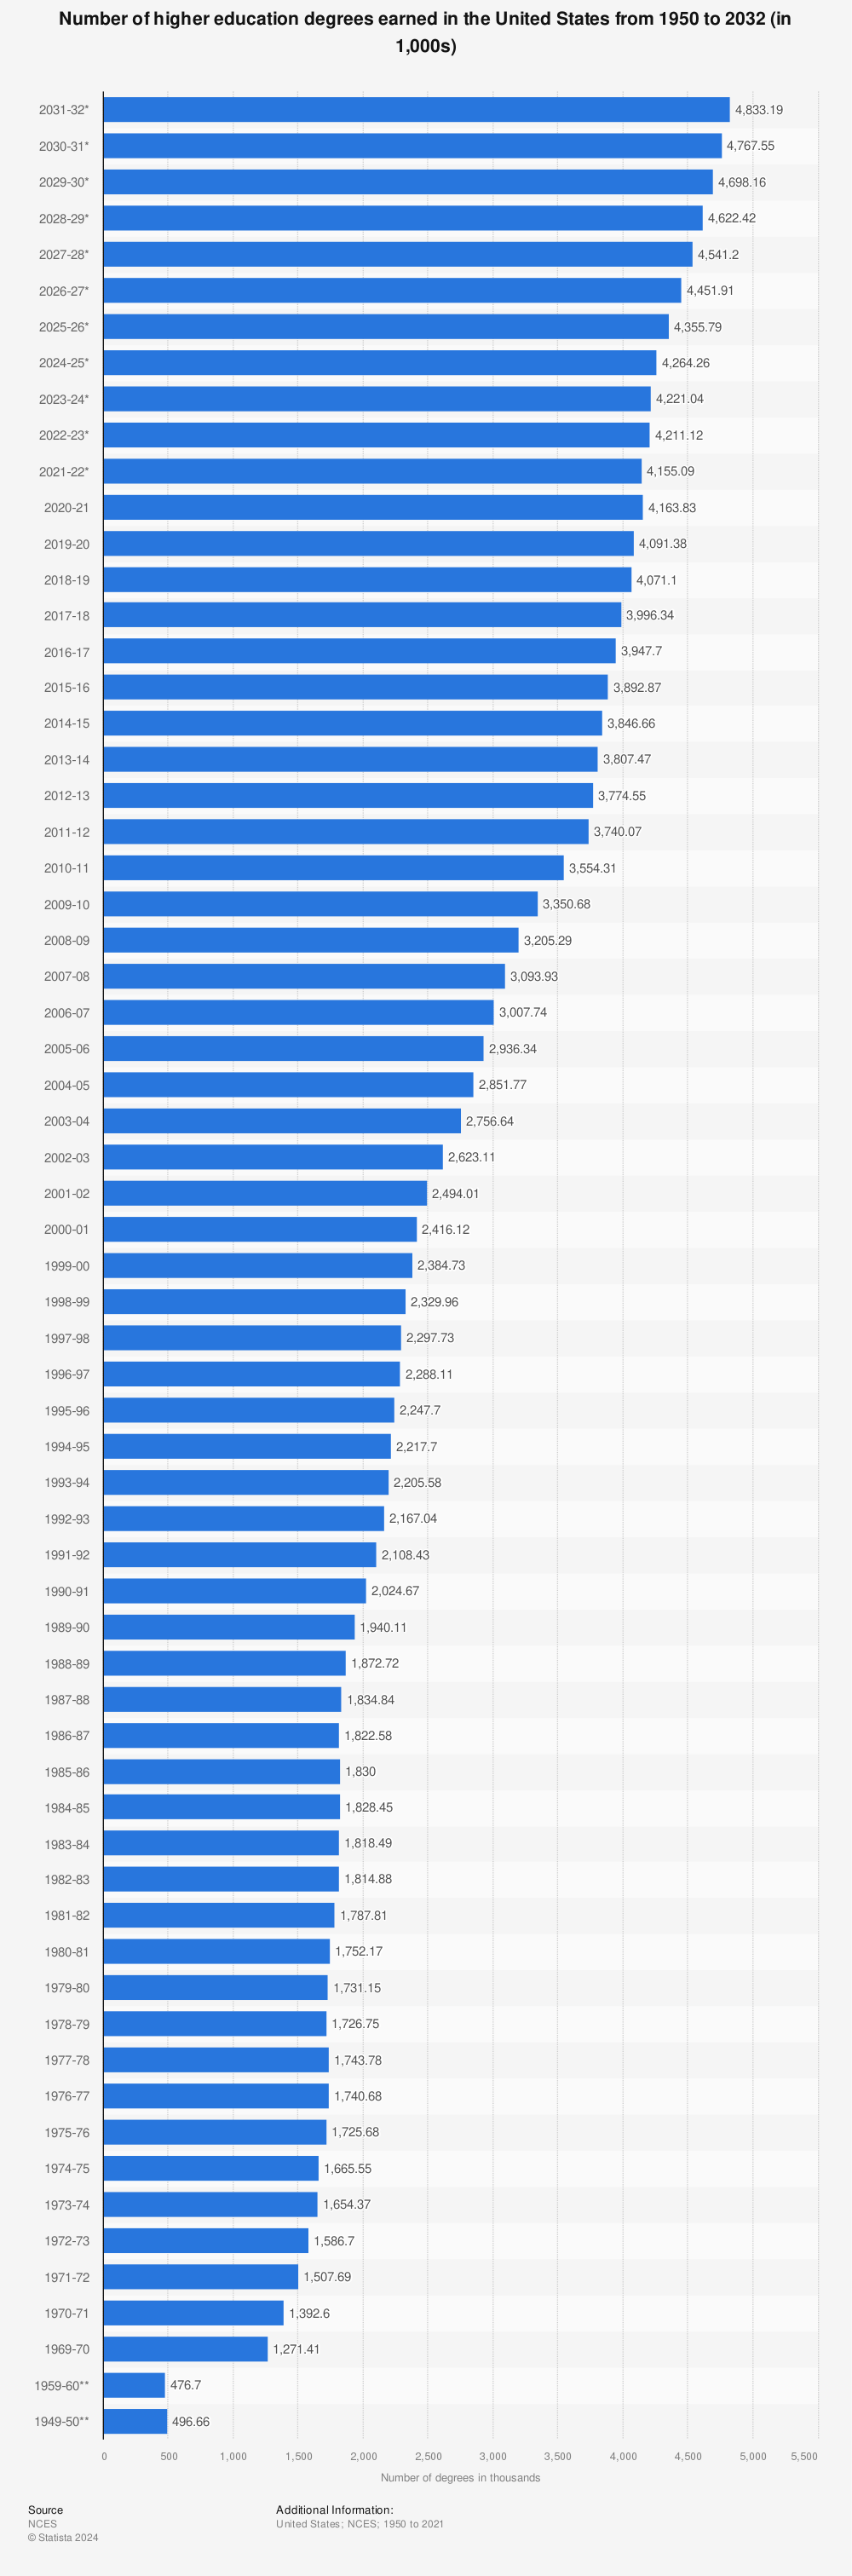 Statistic: Number of higher education degrees earned in the United States from 1950 to 2030 (in 1,000s) | Statista